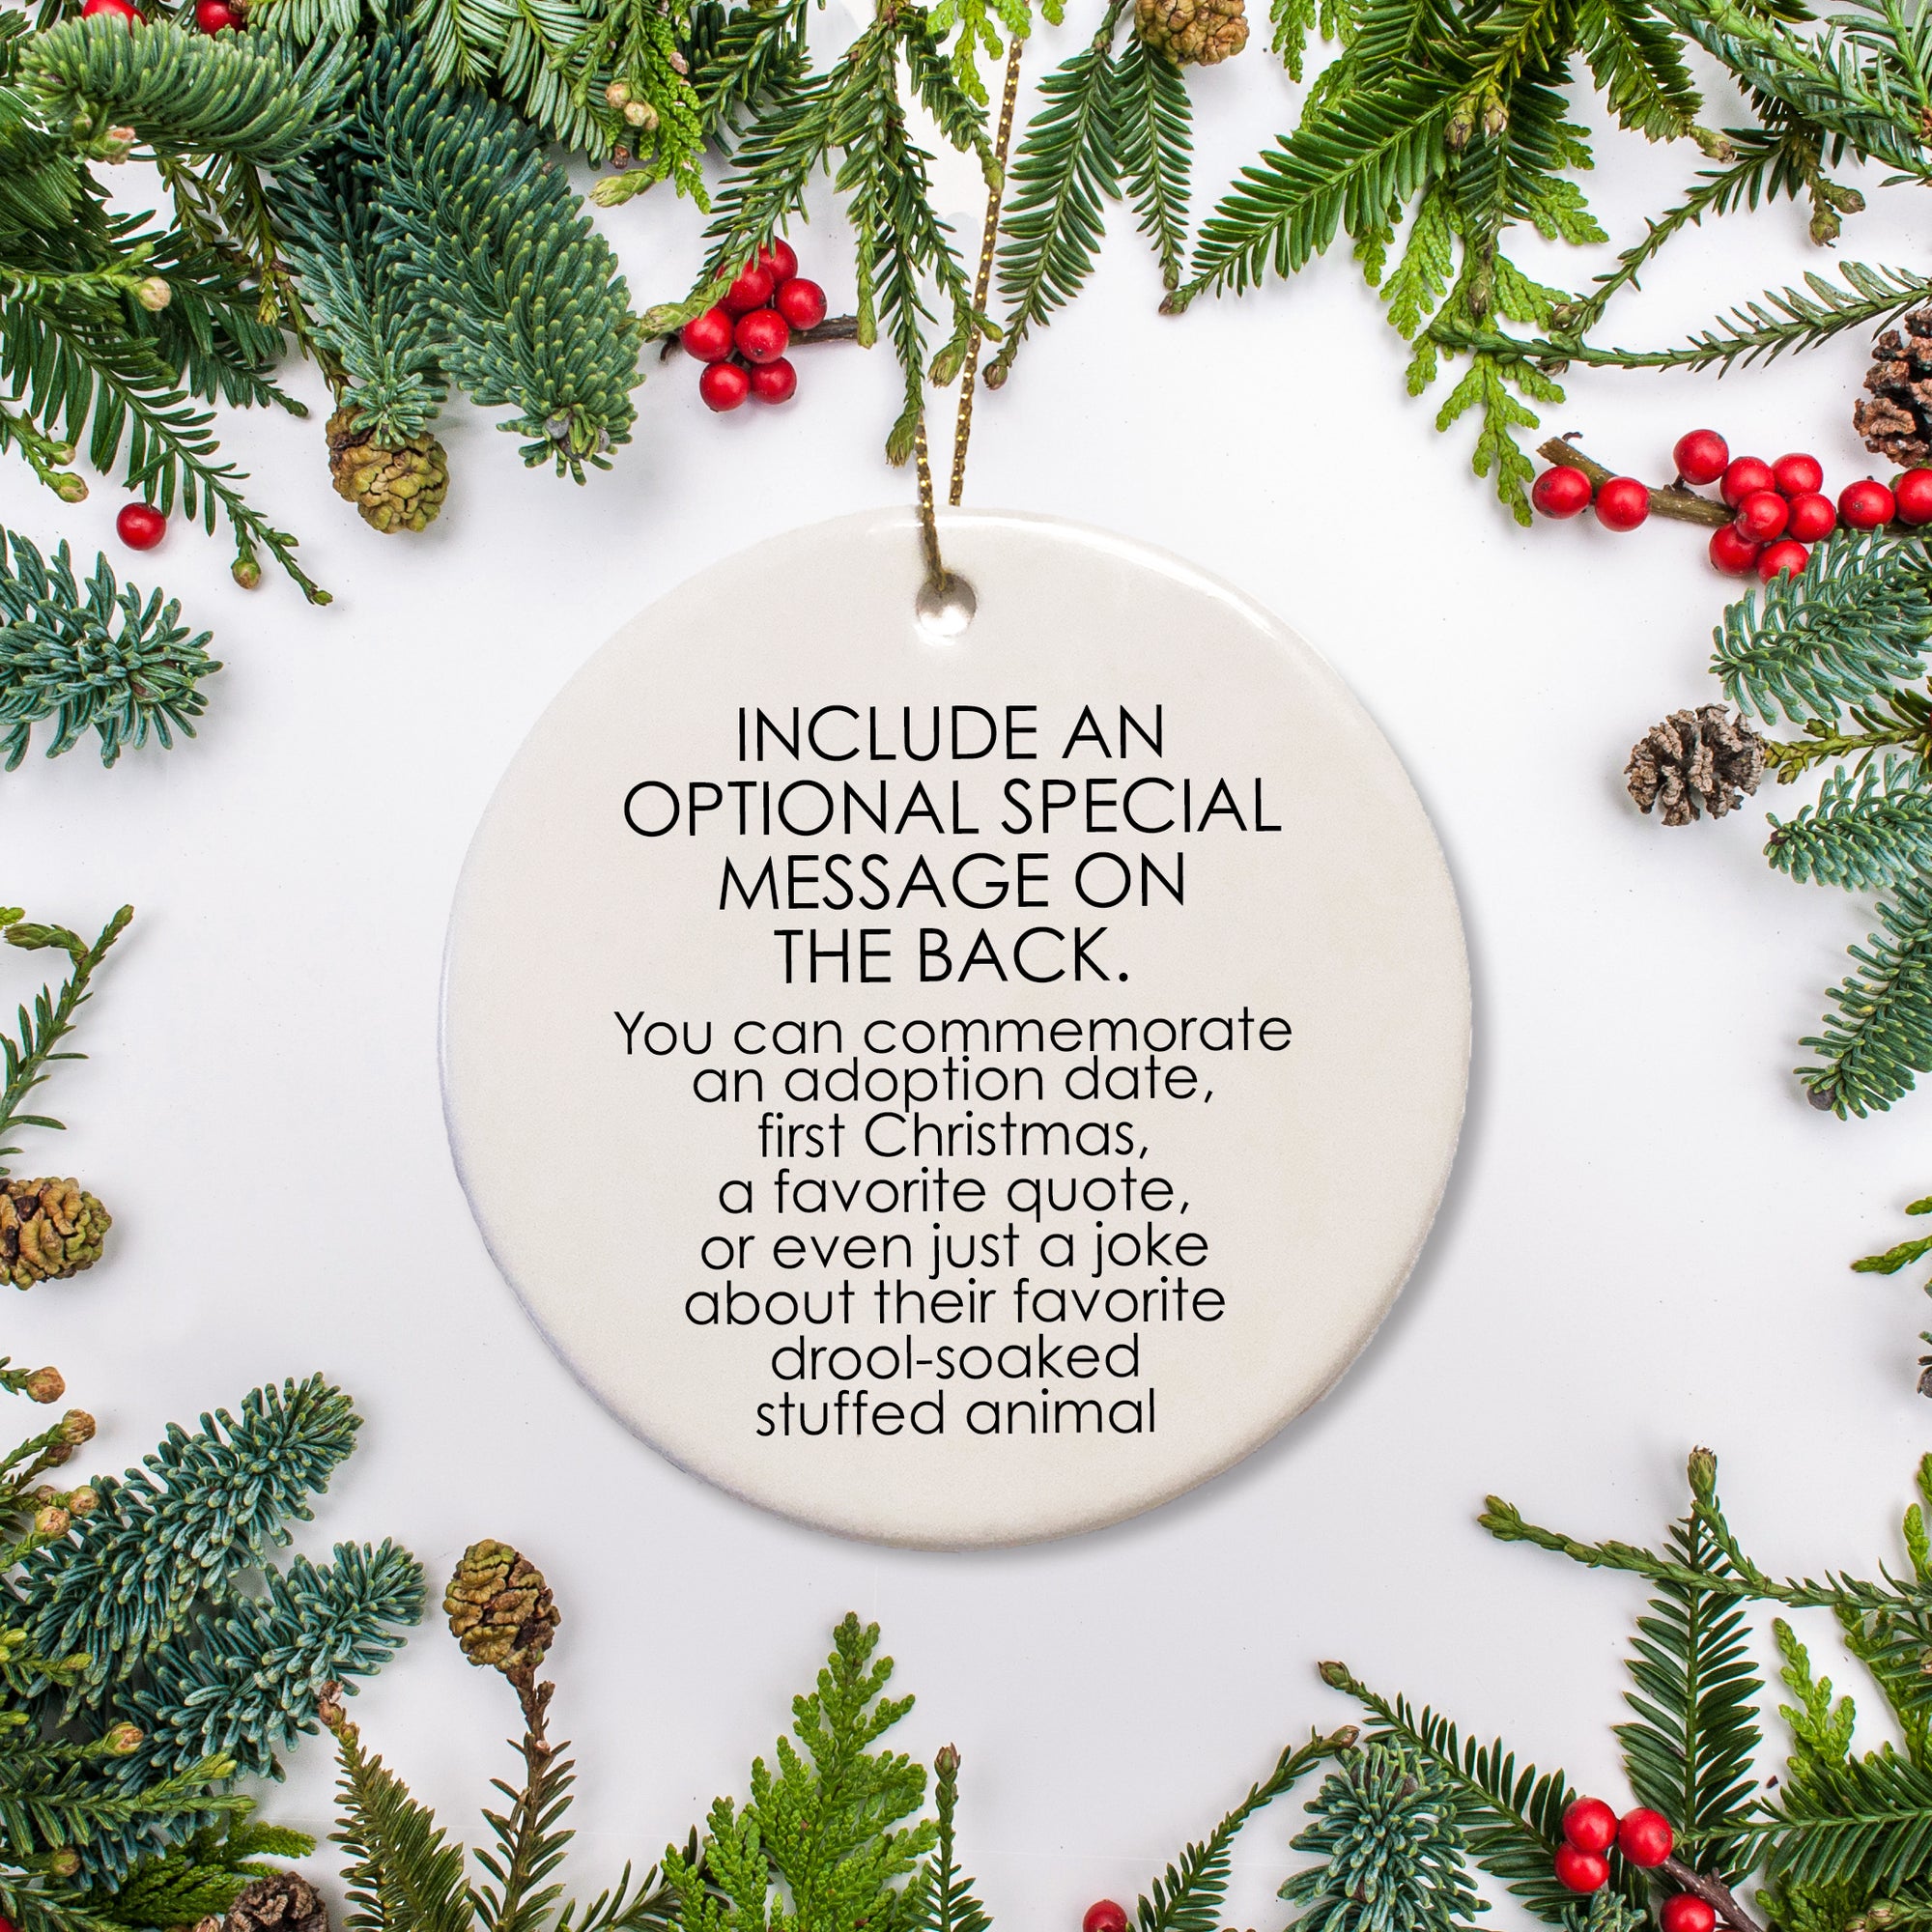 Have a special message printed on the back for your fur baby pet. You can include adoption dates, "my first Christmas", or a favorite pet quote